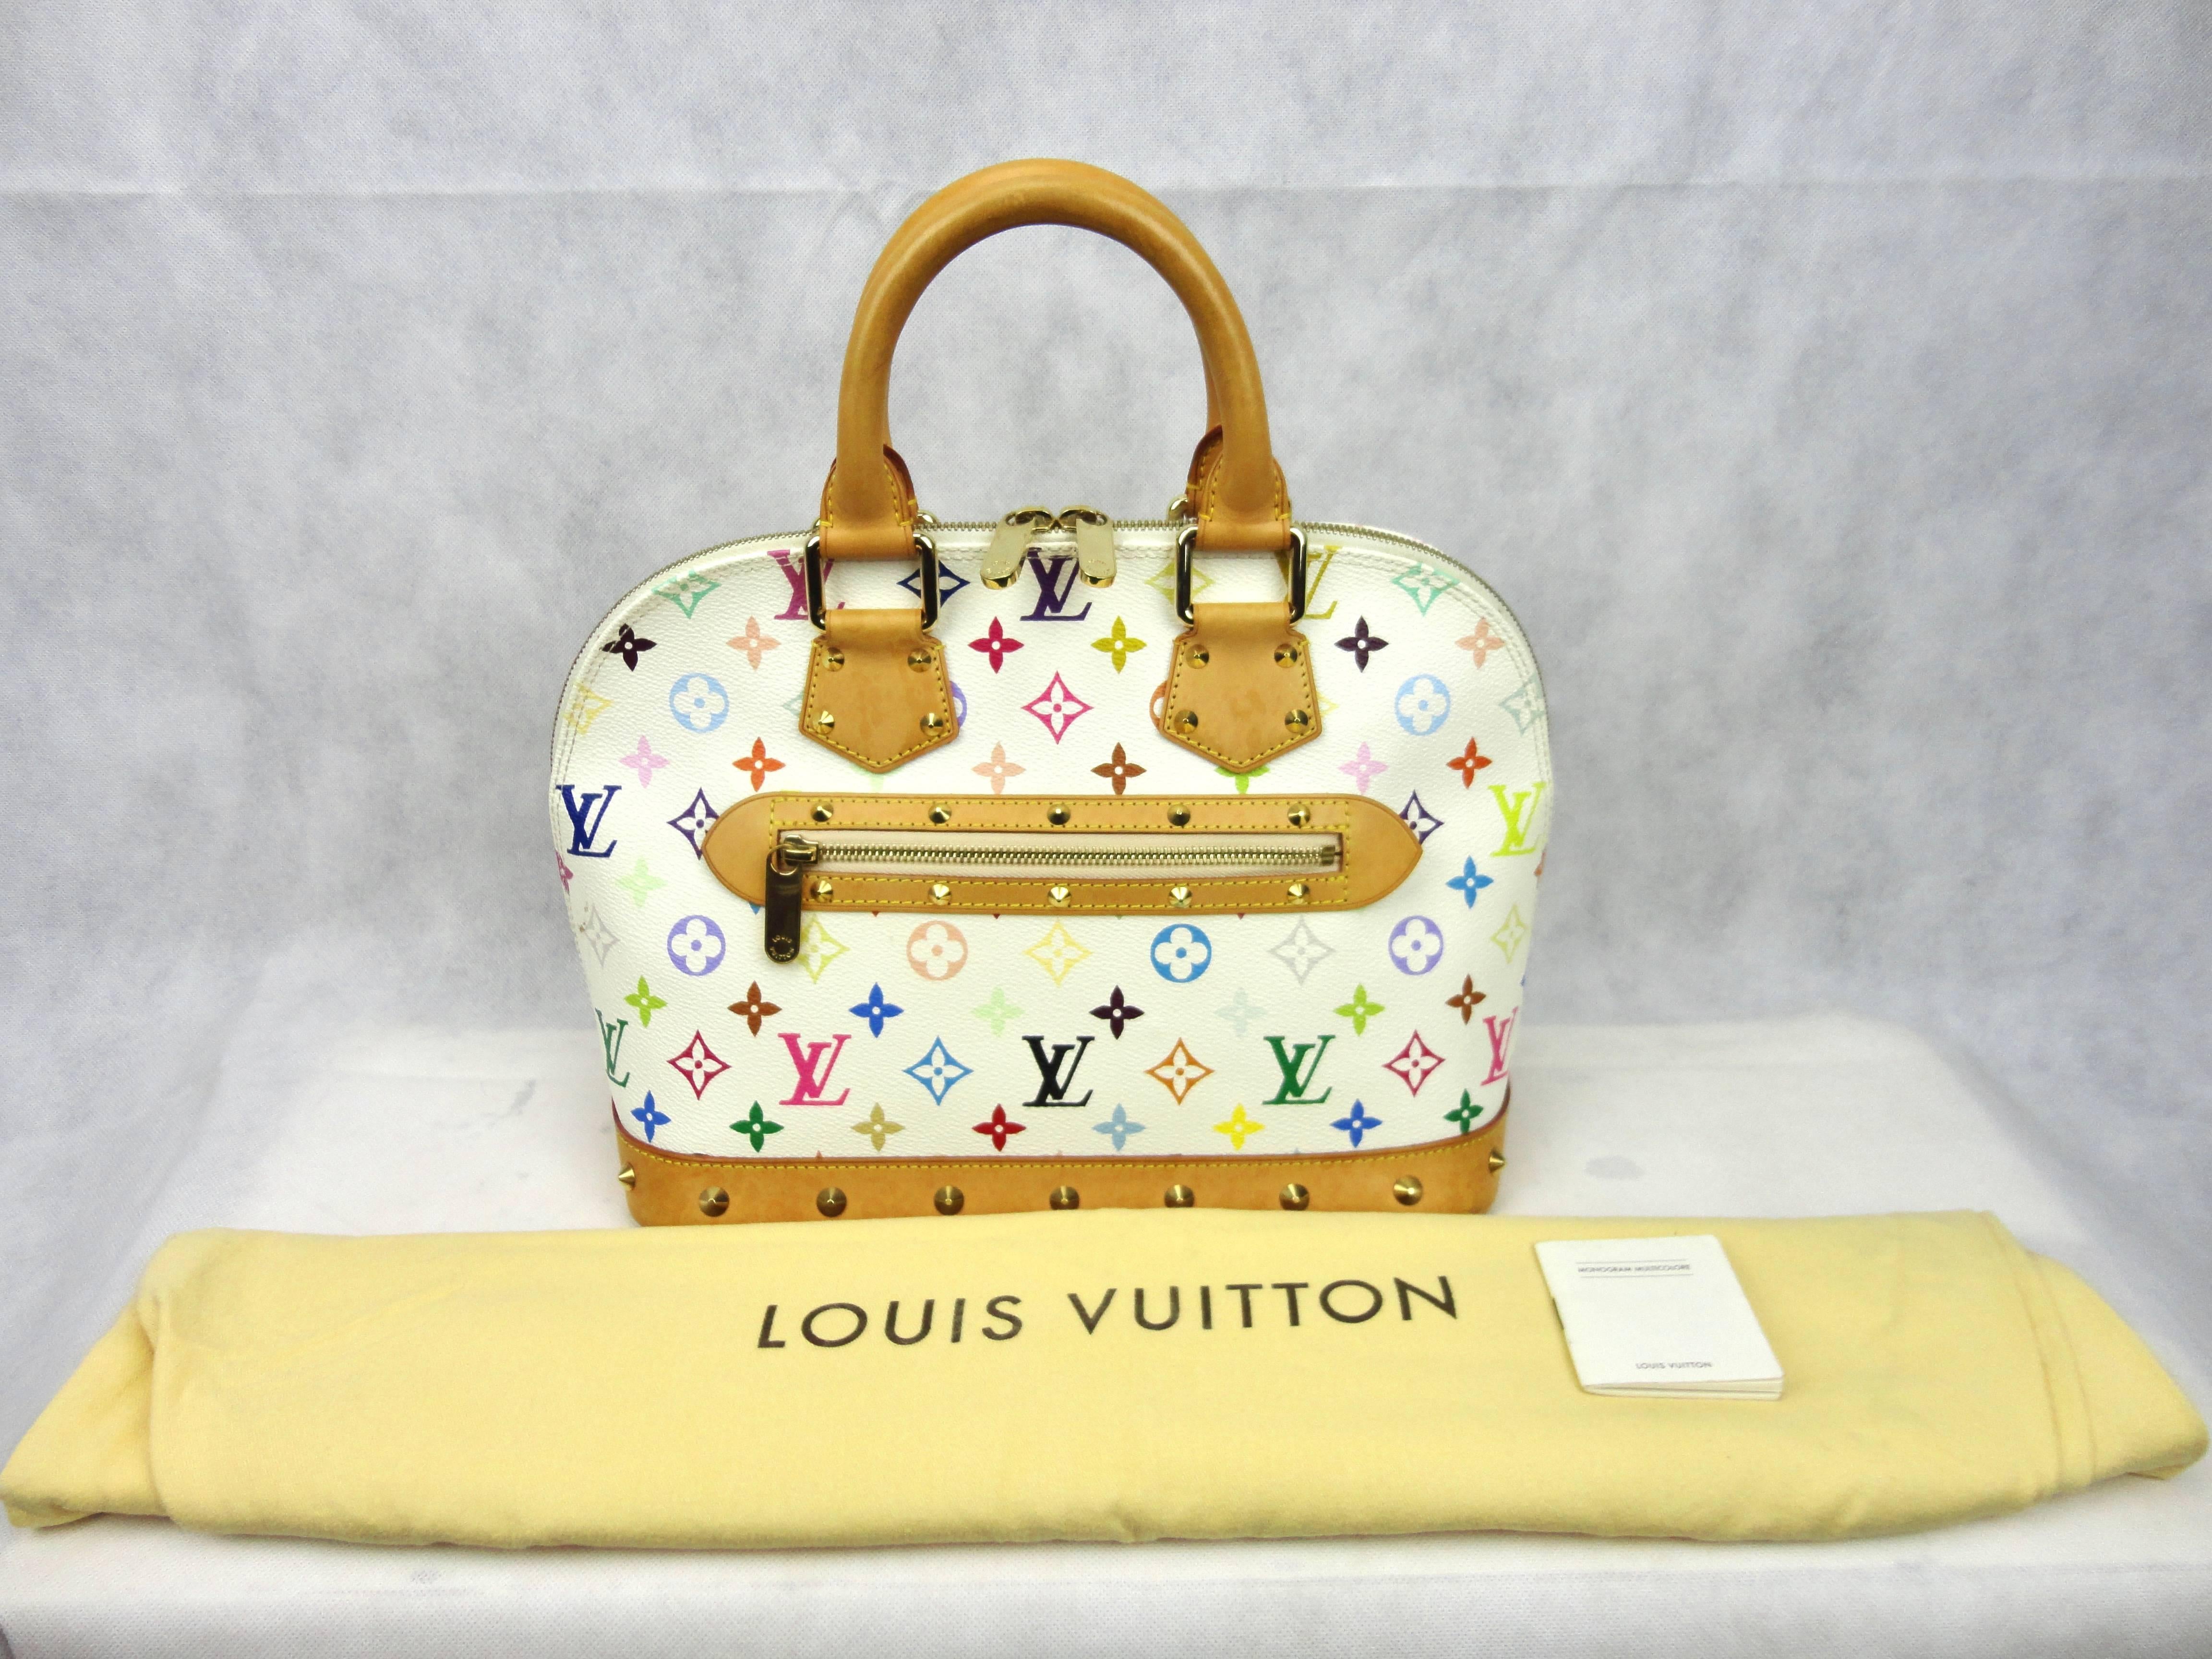 Louis Vuitton Alma Handbag Monogram Multicolor is a versatile structured bag that complements both dressy and casual look perfect for the modern woman. Designed in Takashi Murakami's famous white monogram multicolor print coated canvas, this